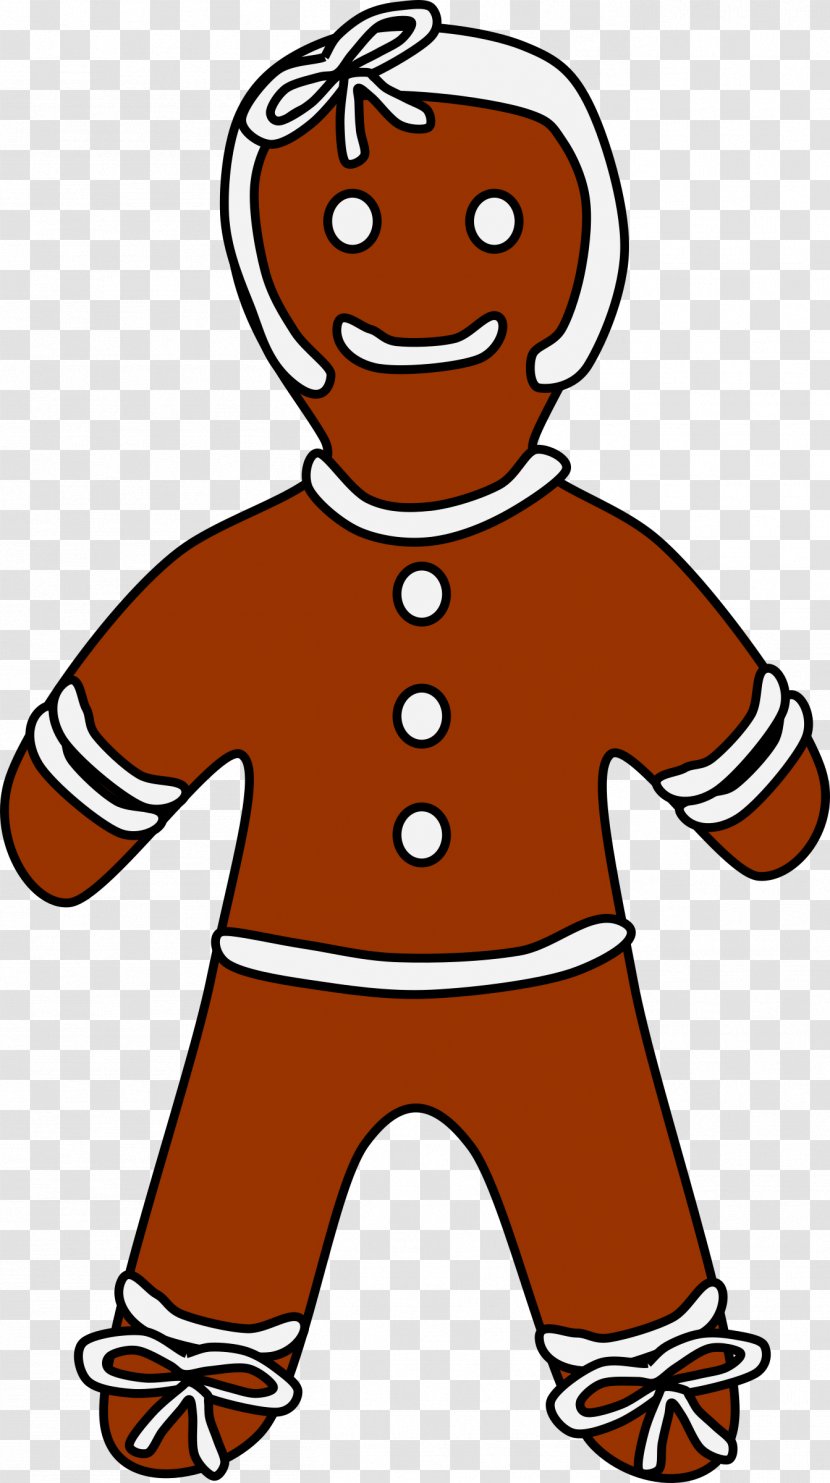 The Gingerbread Man House Clip Art - Area Transparent PNG